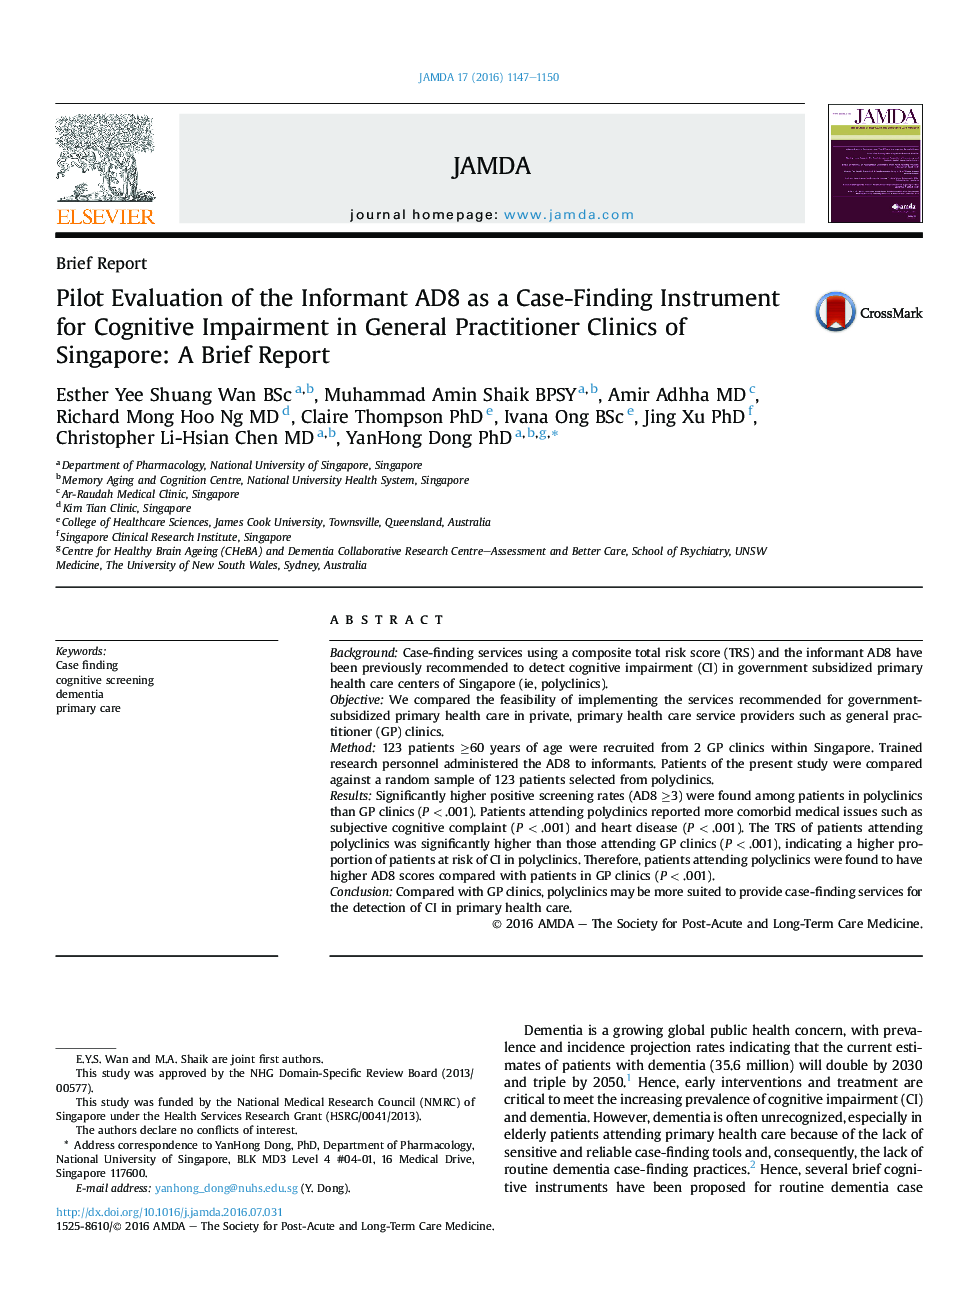 Pilot Evaluation of the Informant AD8 as a Case-Finding Instrument for Cognitive Impairment in General Practitioner Clinics of Singapore: A Brief Report